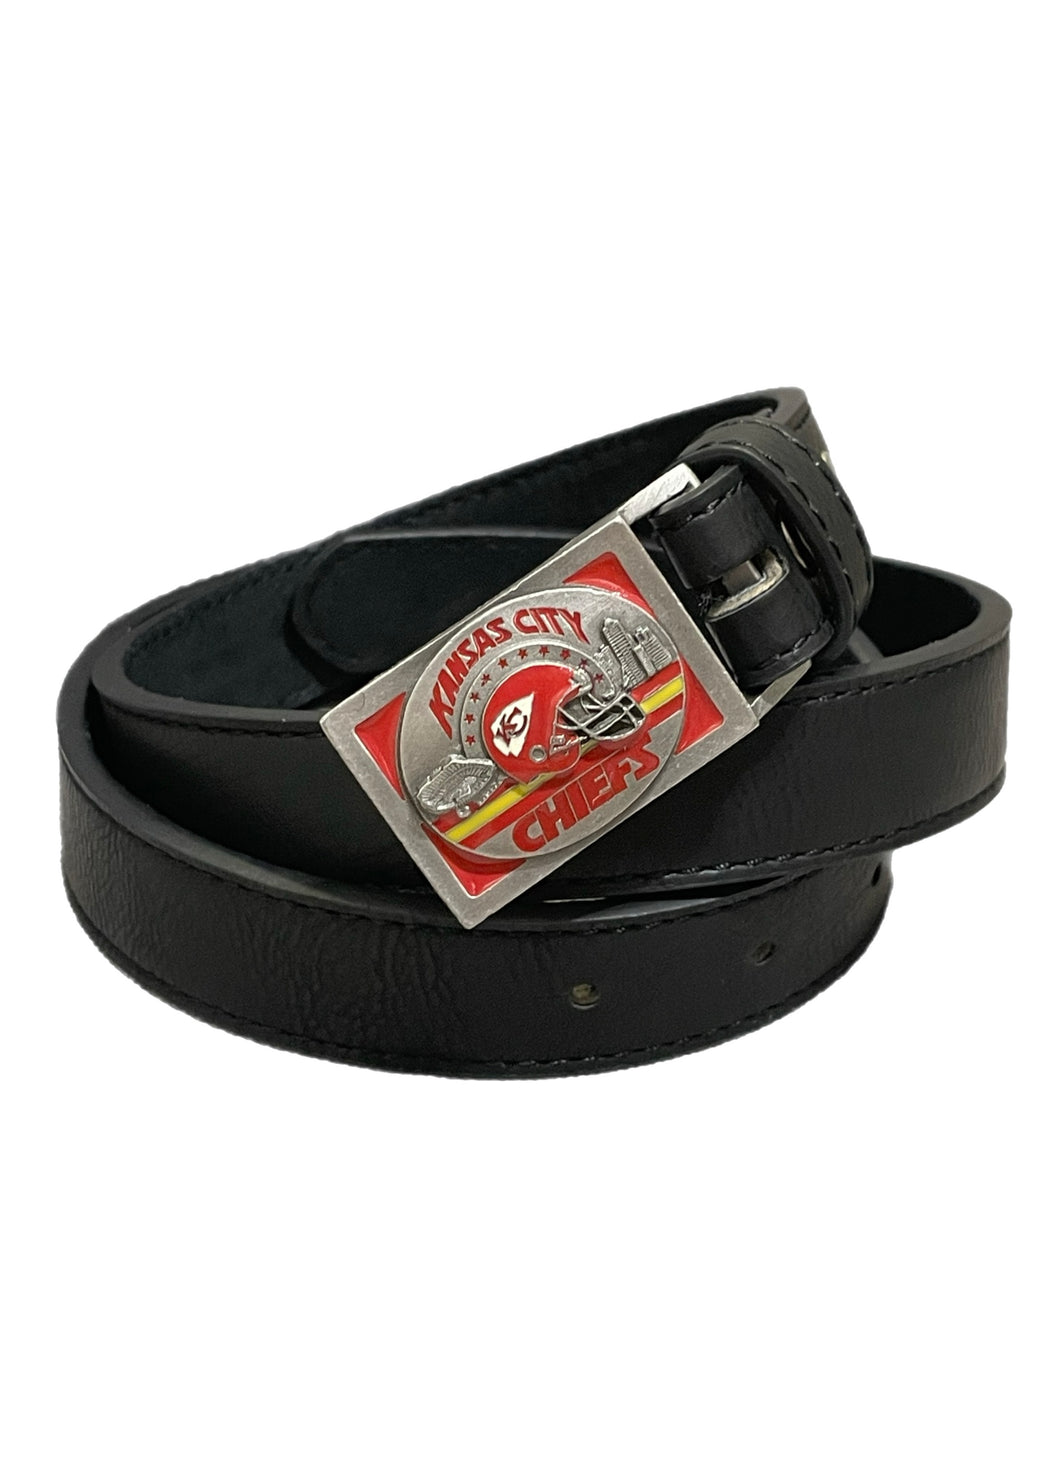 Kansas Chiefs, Football Vintage Belt Buckle with New Soft Leather Strap